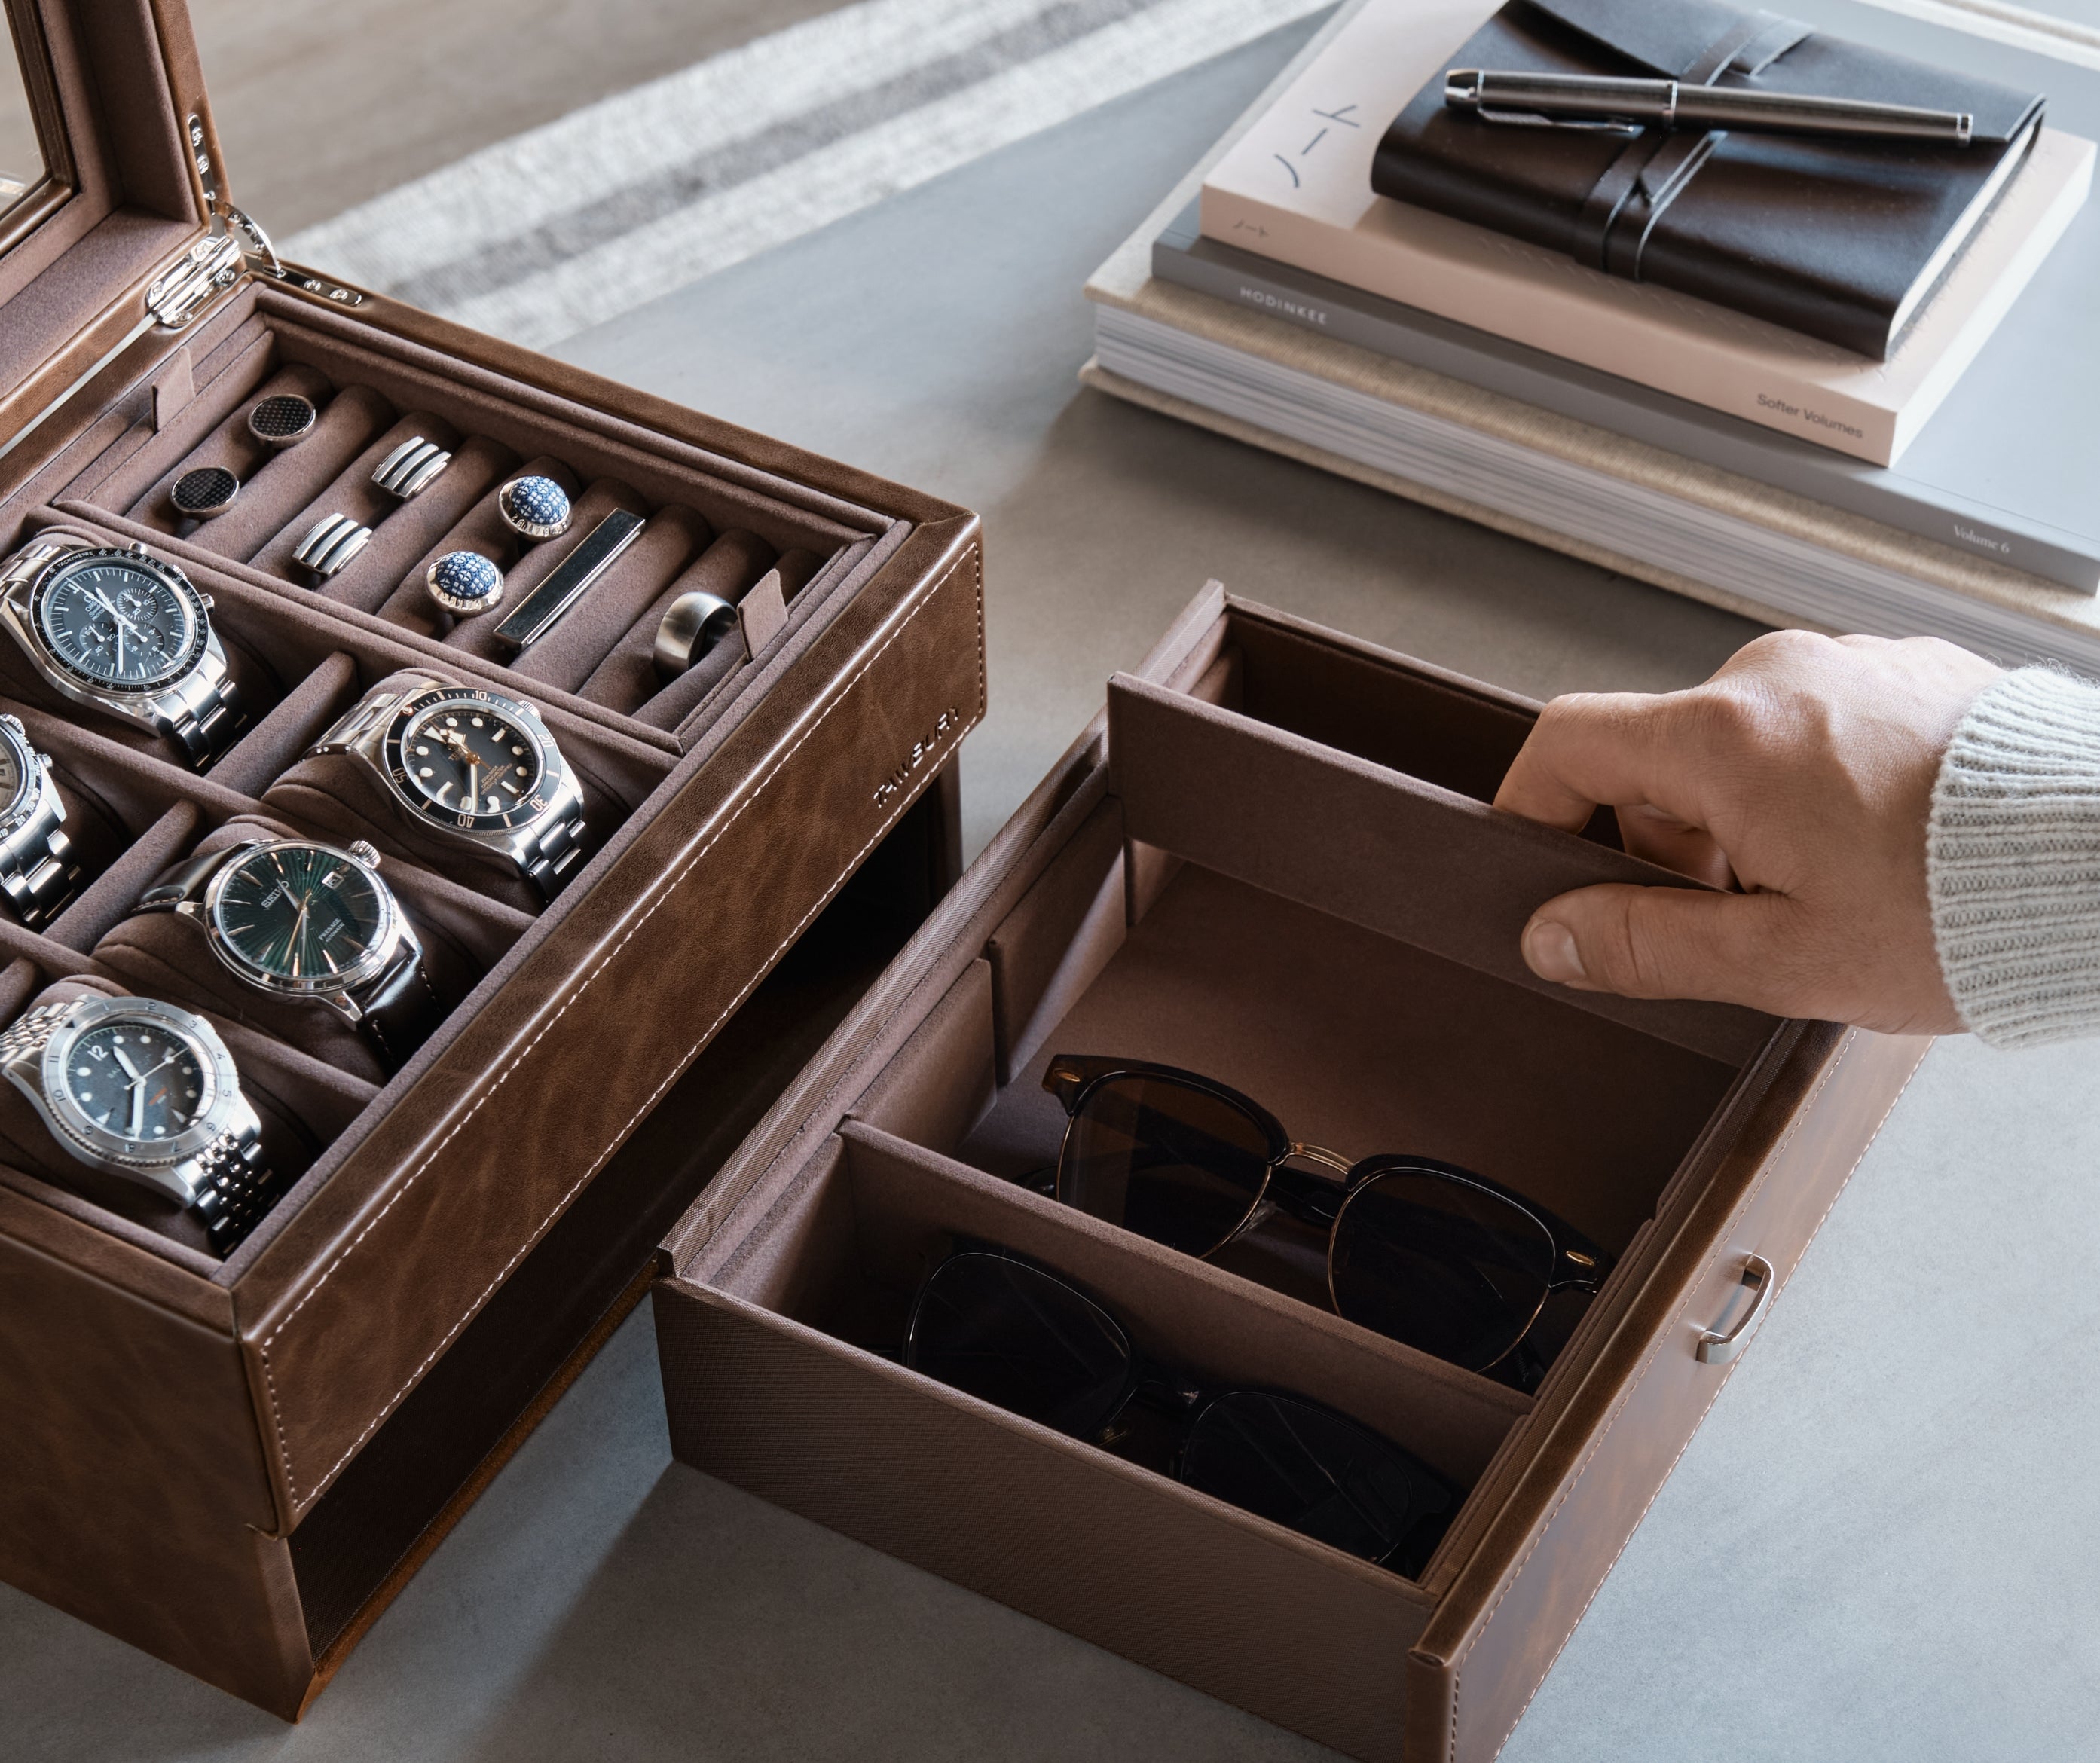 Rothwell San Francisco: Watch Boxes, Travel Cases, Watch Winders